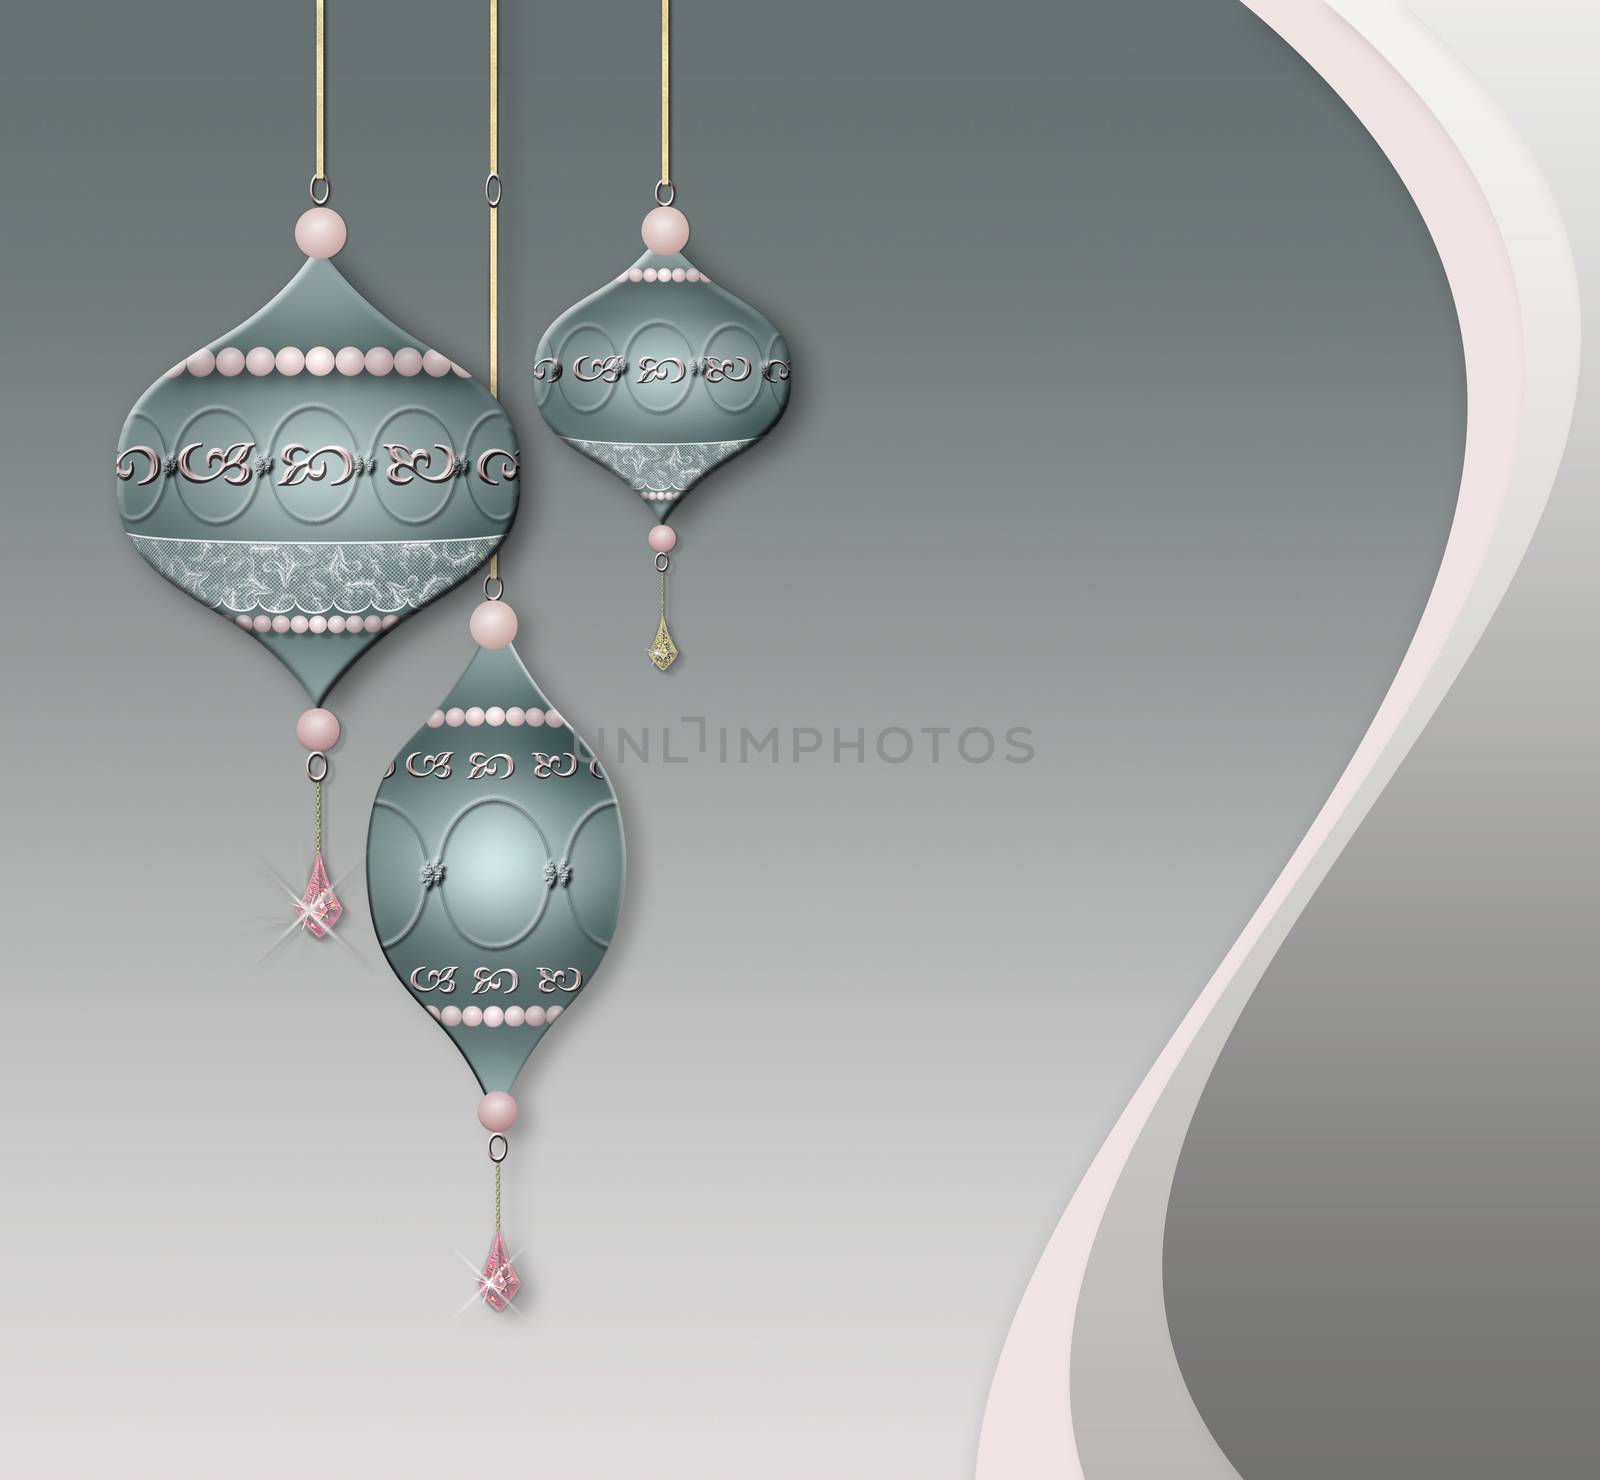 Luxury Xmas jewelry baubles balls for card, invitation, header print and web design on pastel background. 3D illustration